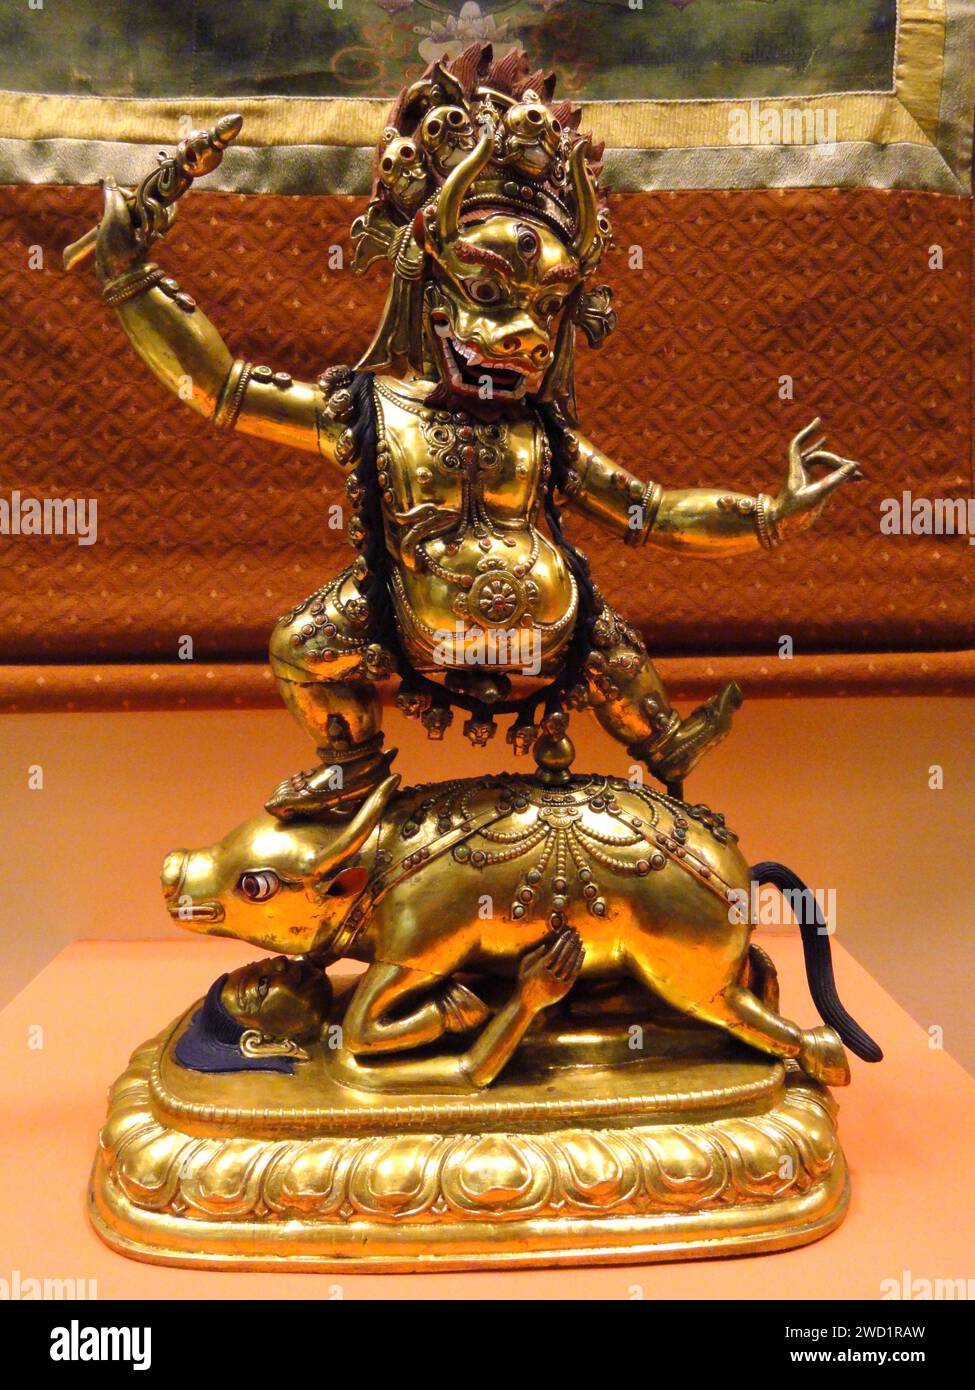 Tibet: Statue of Yama, the King of Hell. American Museum of Natural History, New York. Photo by Daderot.  In East Asian mythology, Yama is a dharmapala (wrathful god) and King of Hell. It is his duty to judge the dead and rule over the various hells and purgatories, presiding over the cycle of samsara (cyclic, circuitous change). Yama has spread from being a Hindu god to finding roles in Buddhism as well as in Chinese, Korean and Japanese mythology. Stock Photo